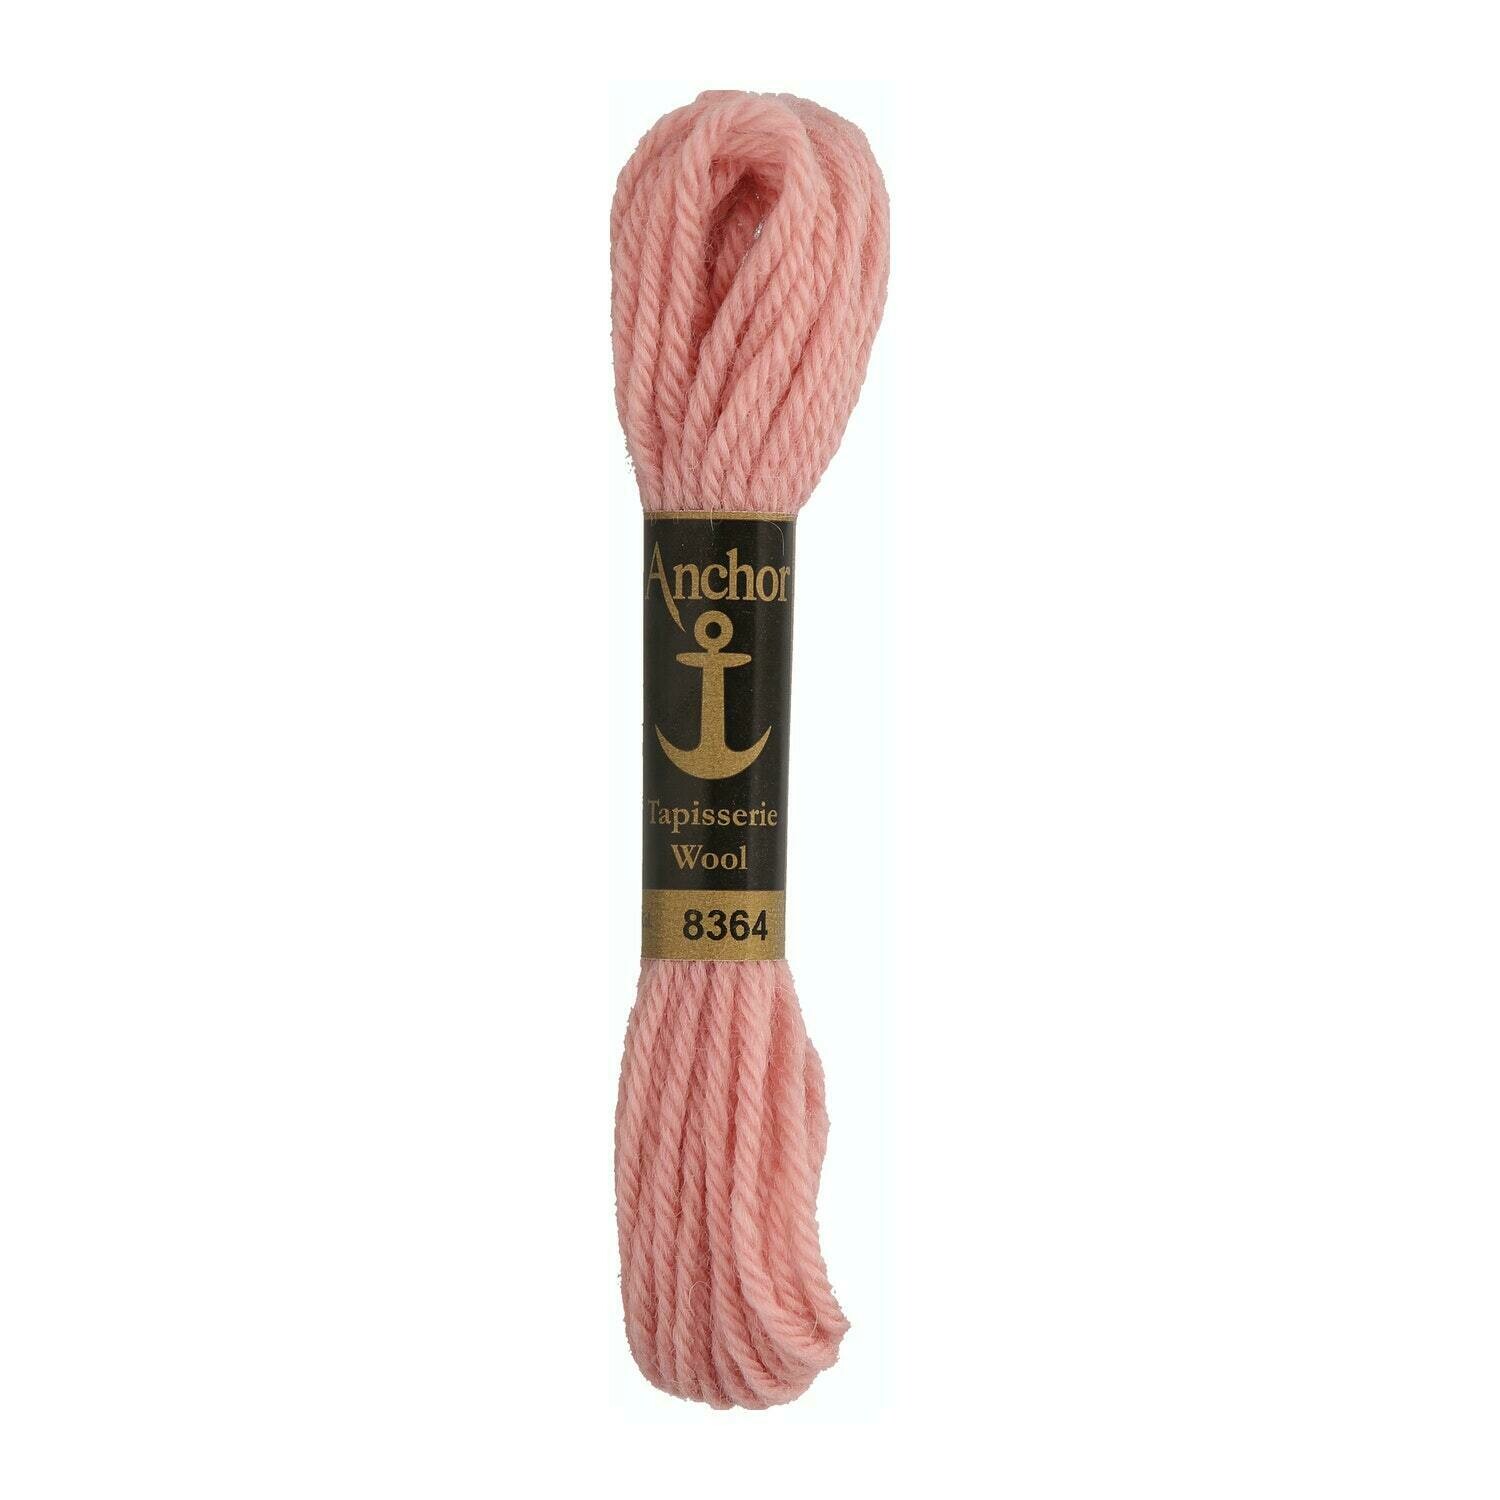 Anchor Tapisserie Wool #08364